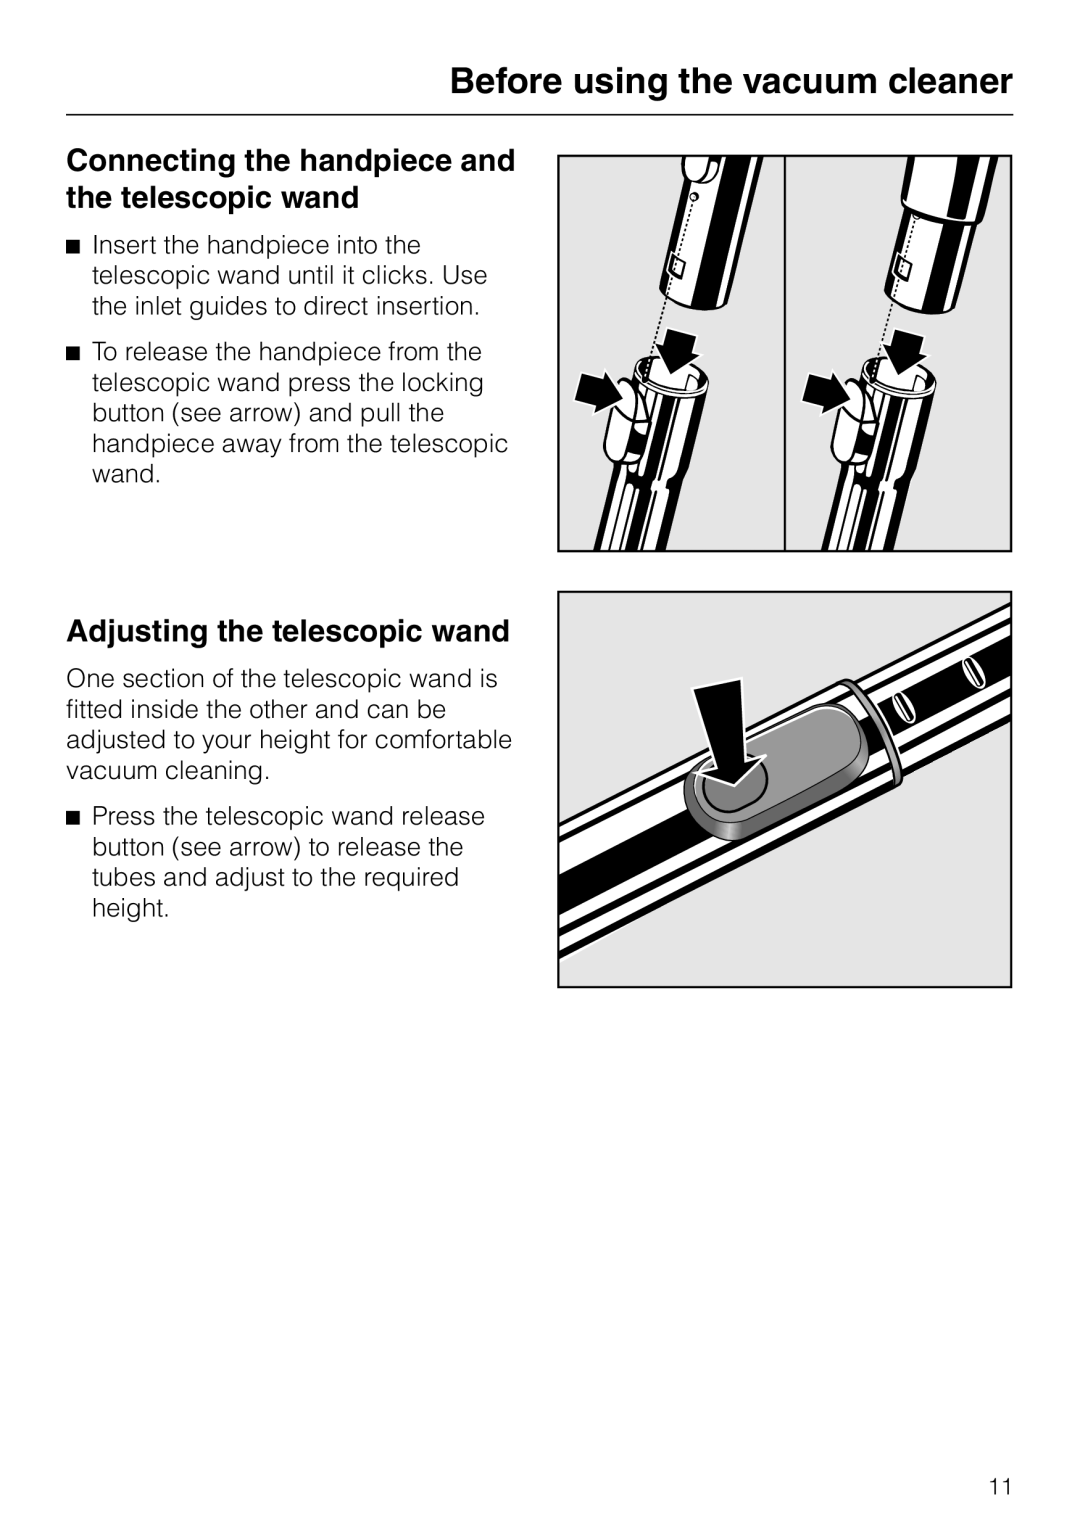 Miele S 5000 operating instructions Connecting the handpiece and the telescopic wand, Adjusting the telescopic wand 